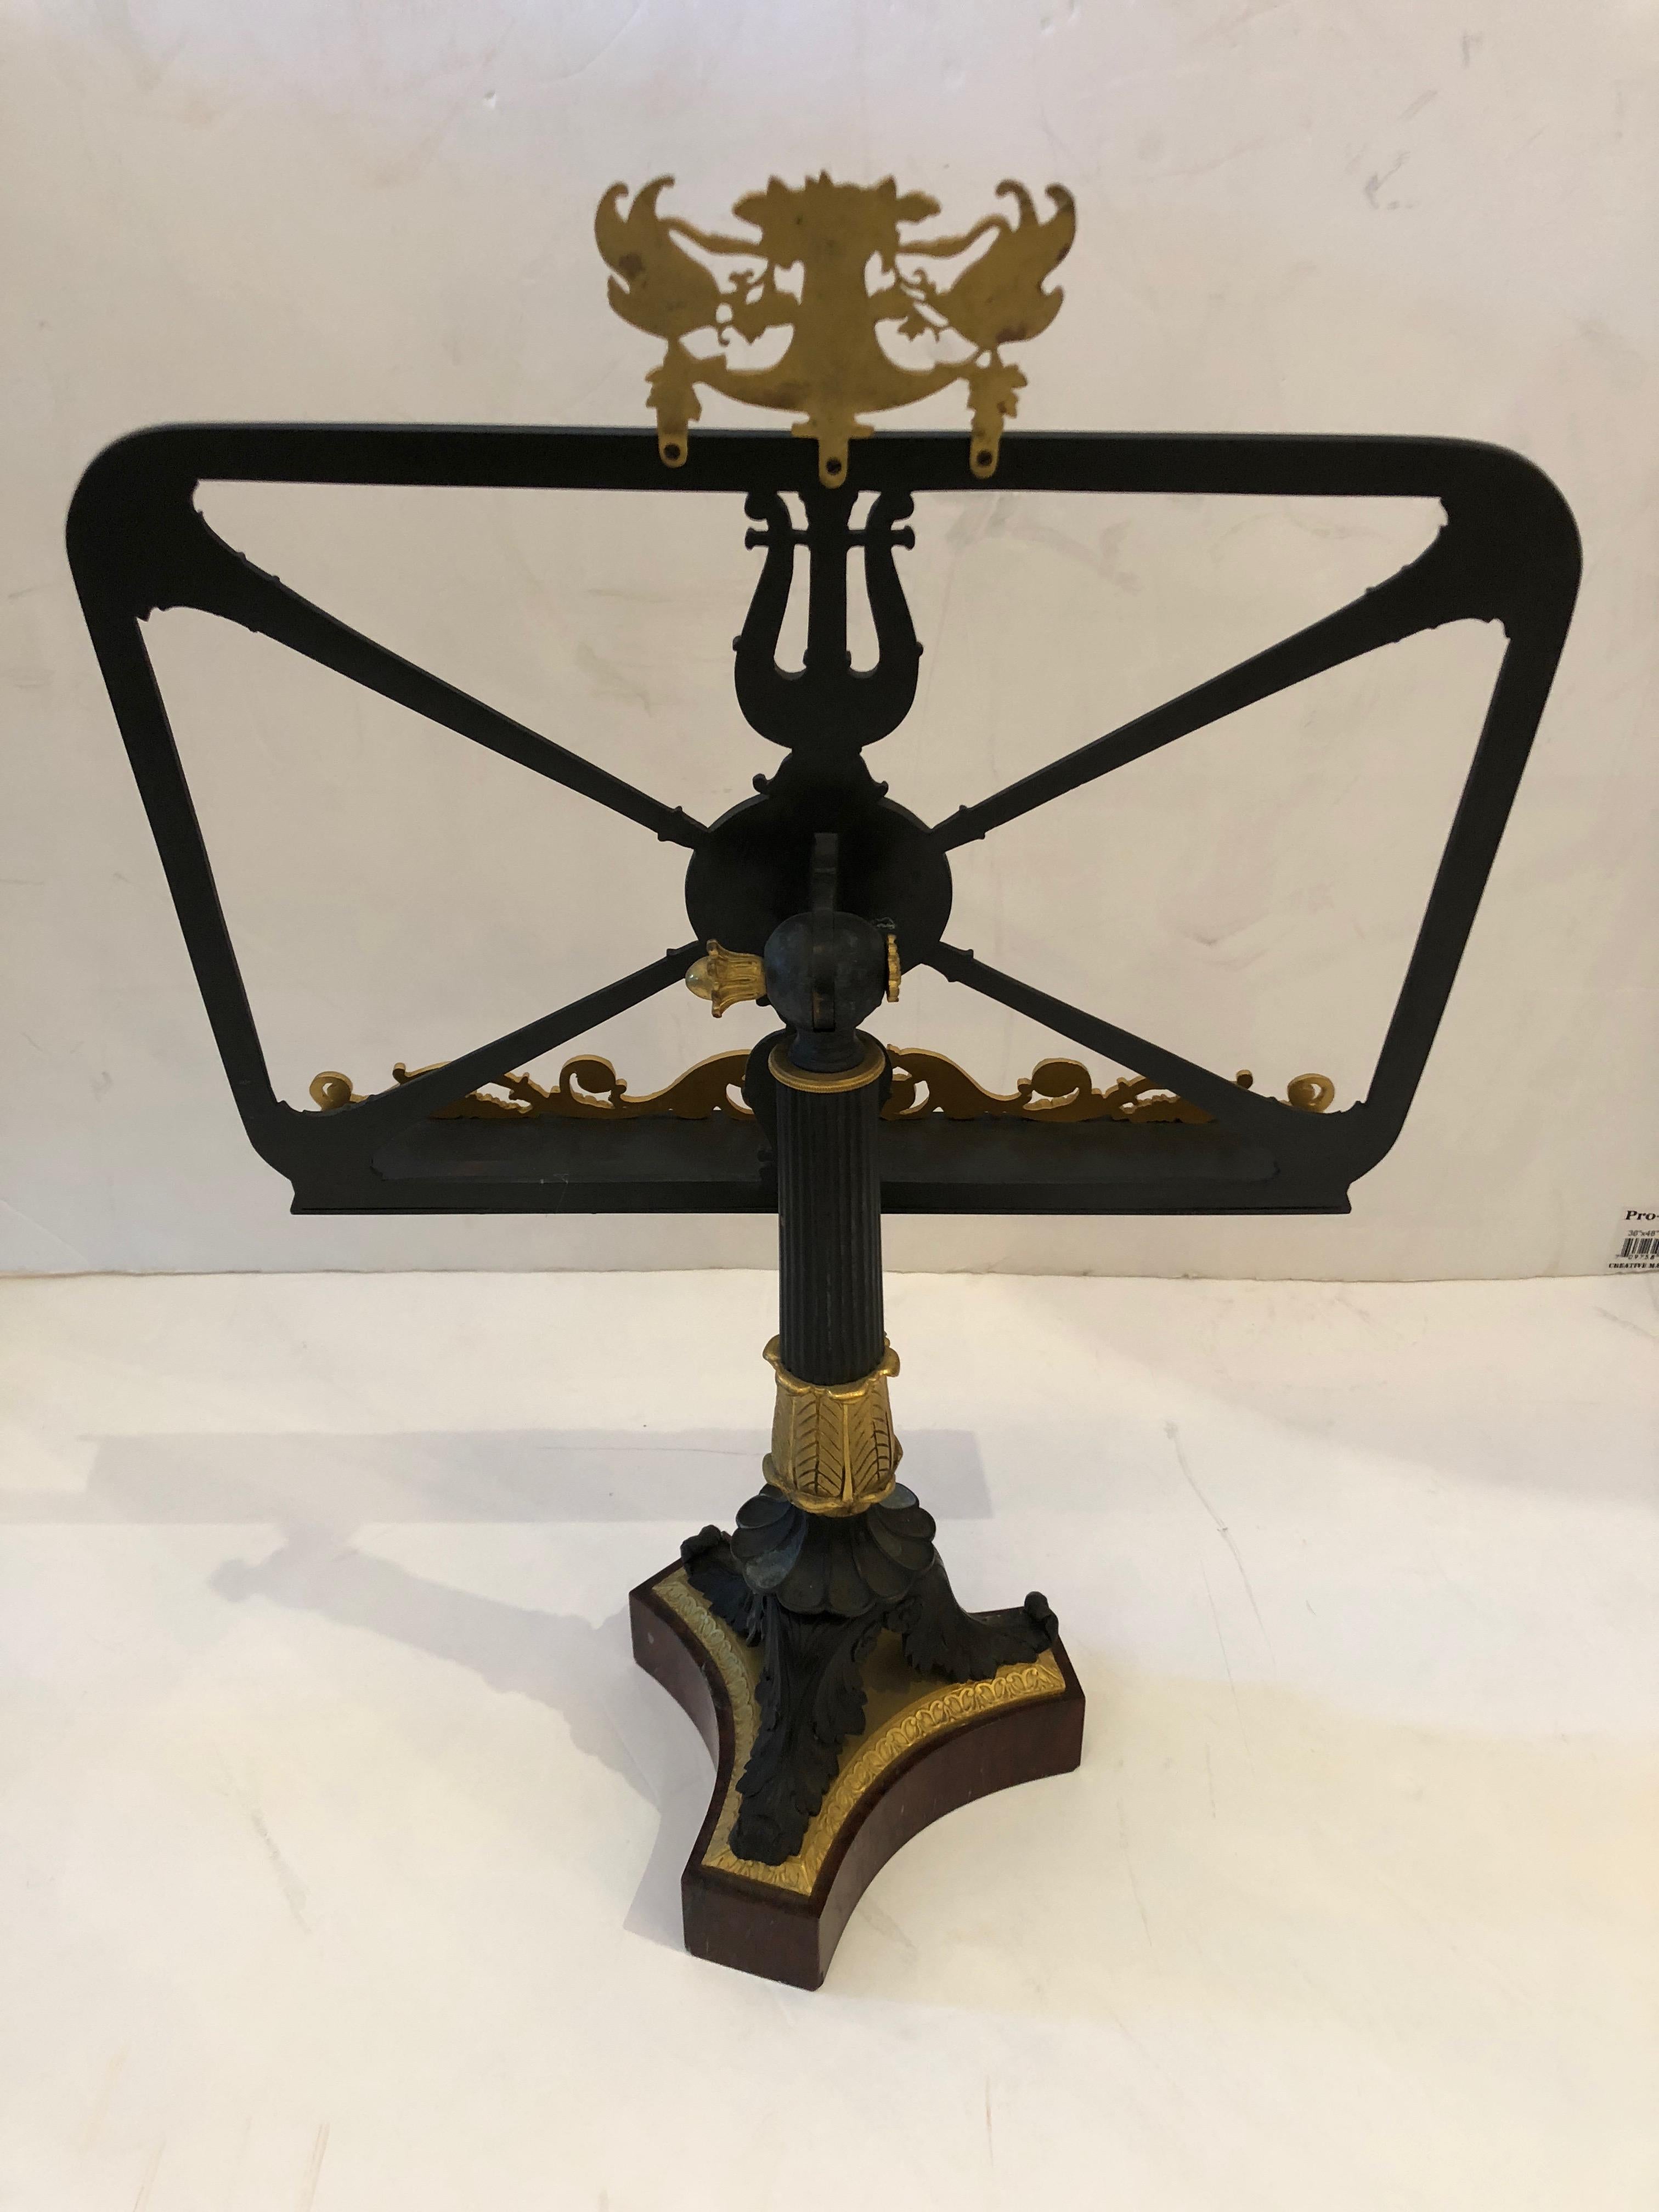 Breathtaking Bronze Dore Neoclassical Bookstand or Short Table Lectern 1